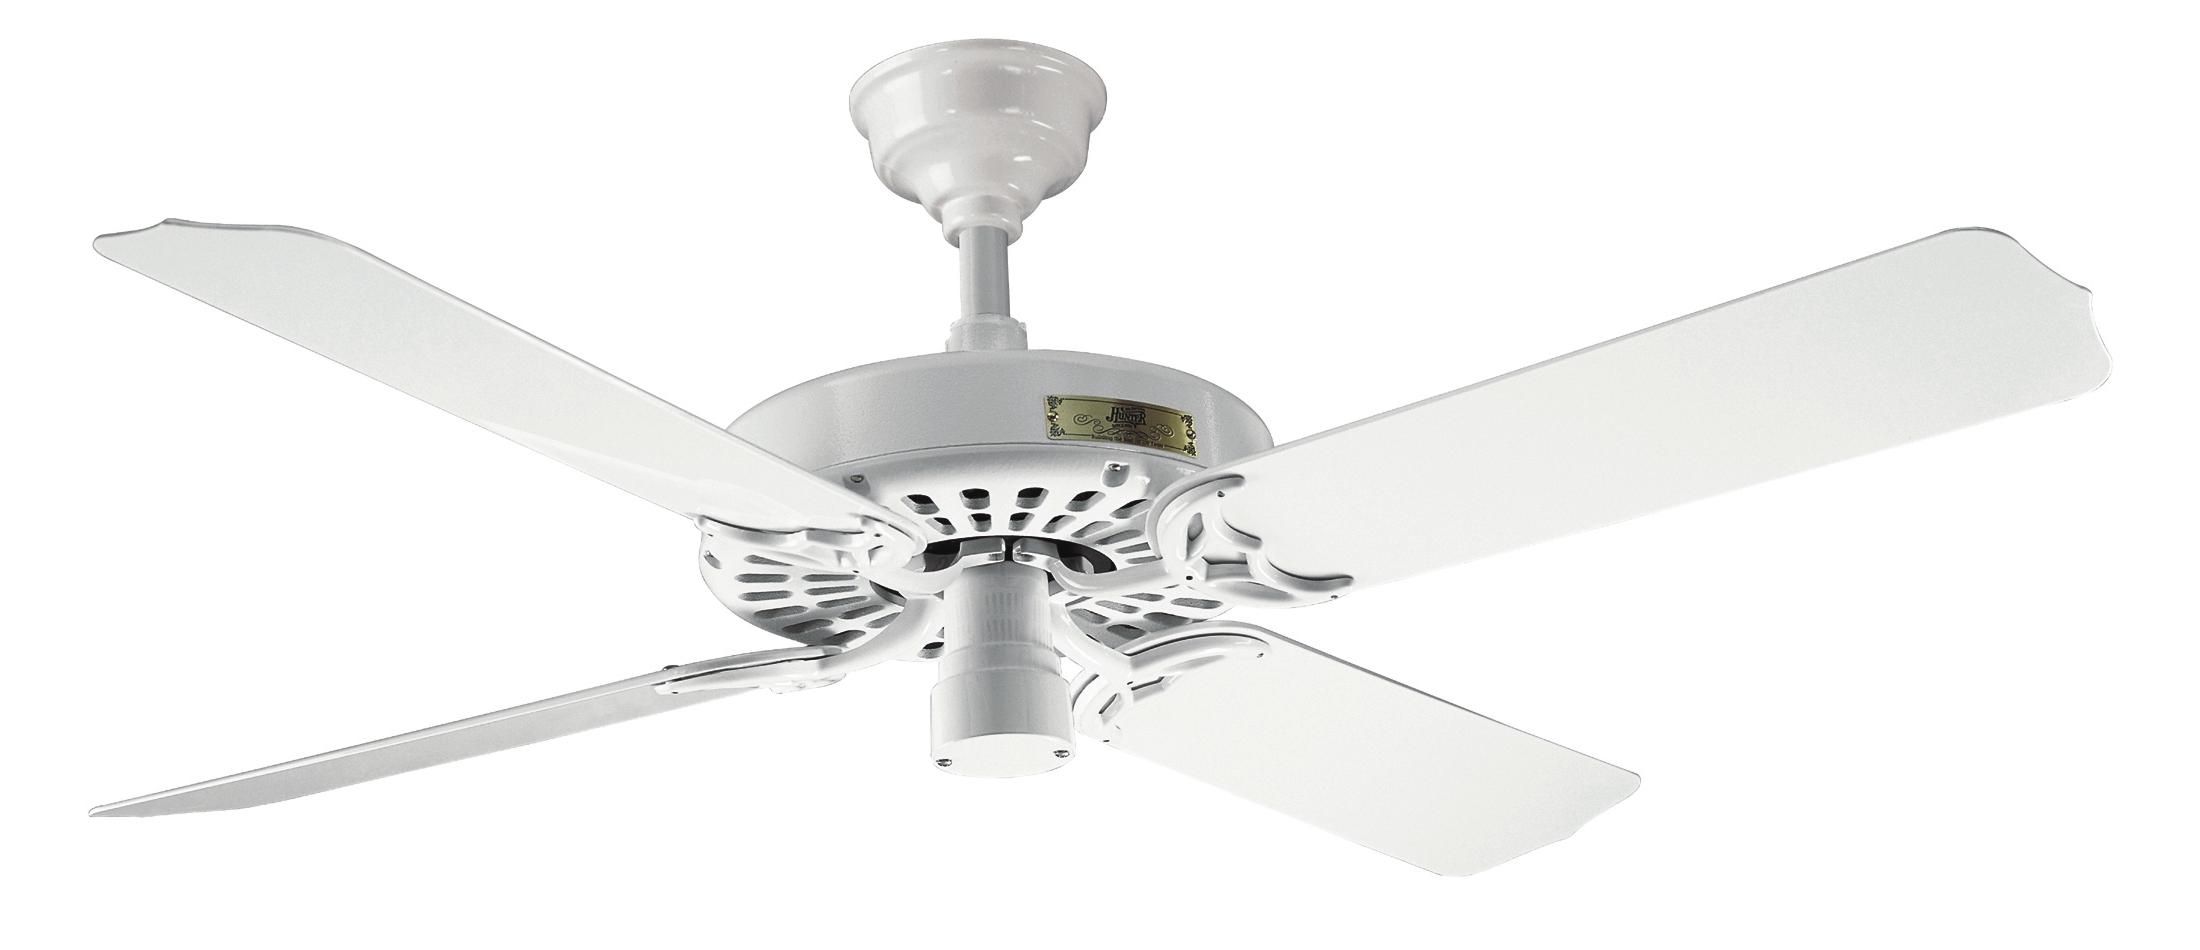 Extraordinary Hunter Outdoor Ceiling Fan With Light In Replacement Inside Hunter Outdoor Ceiling Fans With Lights And Remote (View 3 of 15)